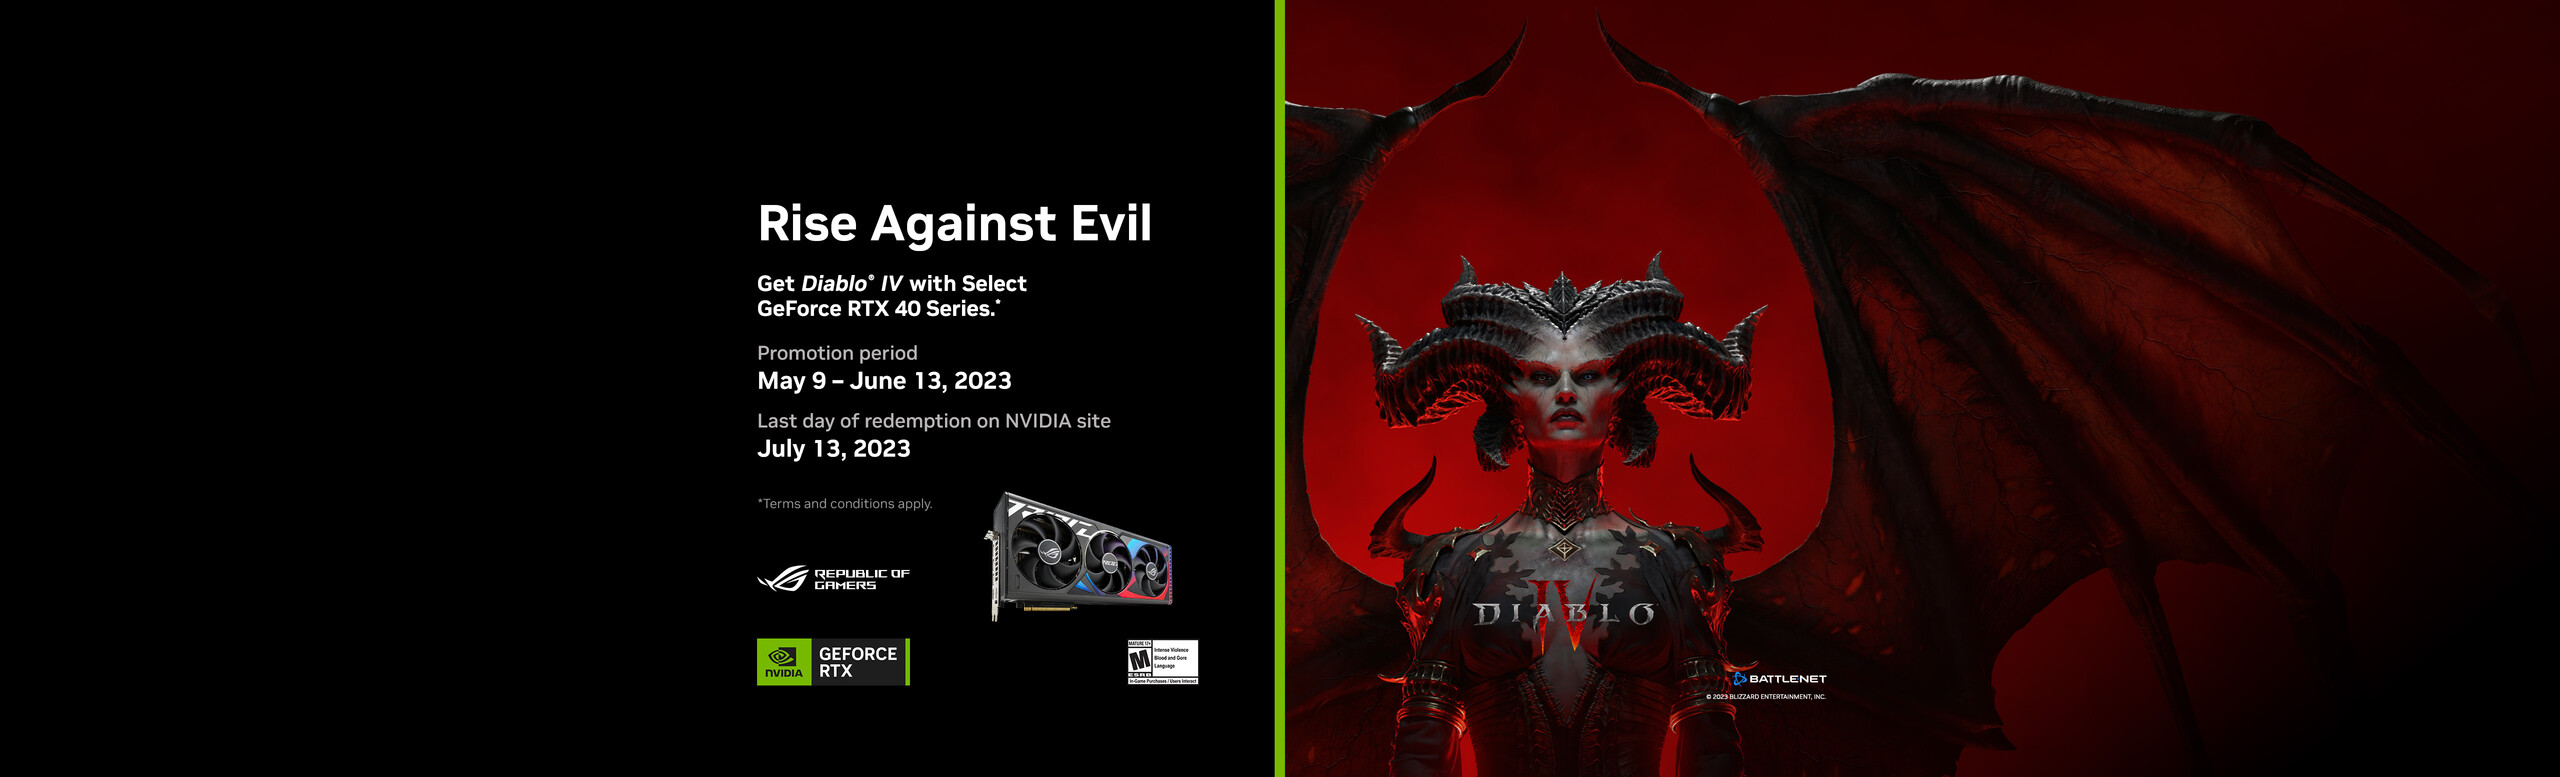 Get Diablo IV with select 40 series graphics cards learn more